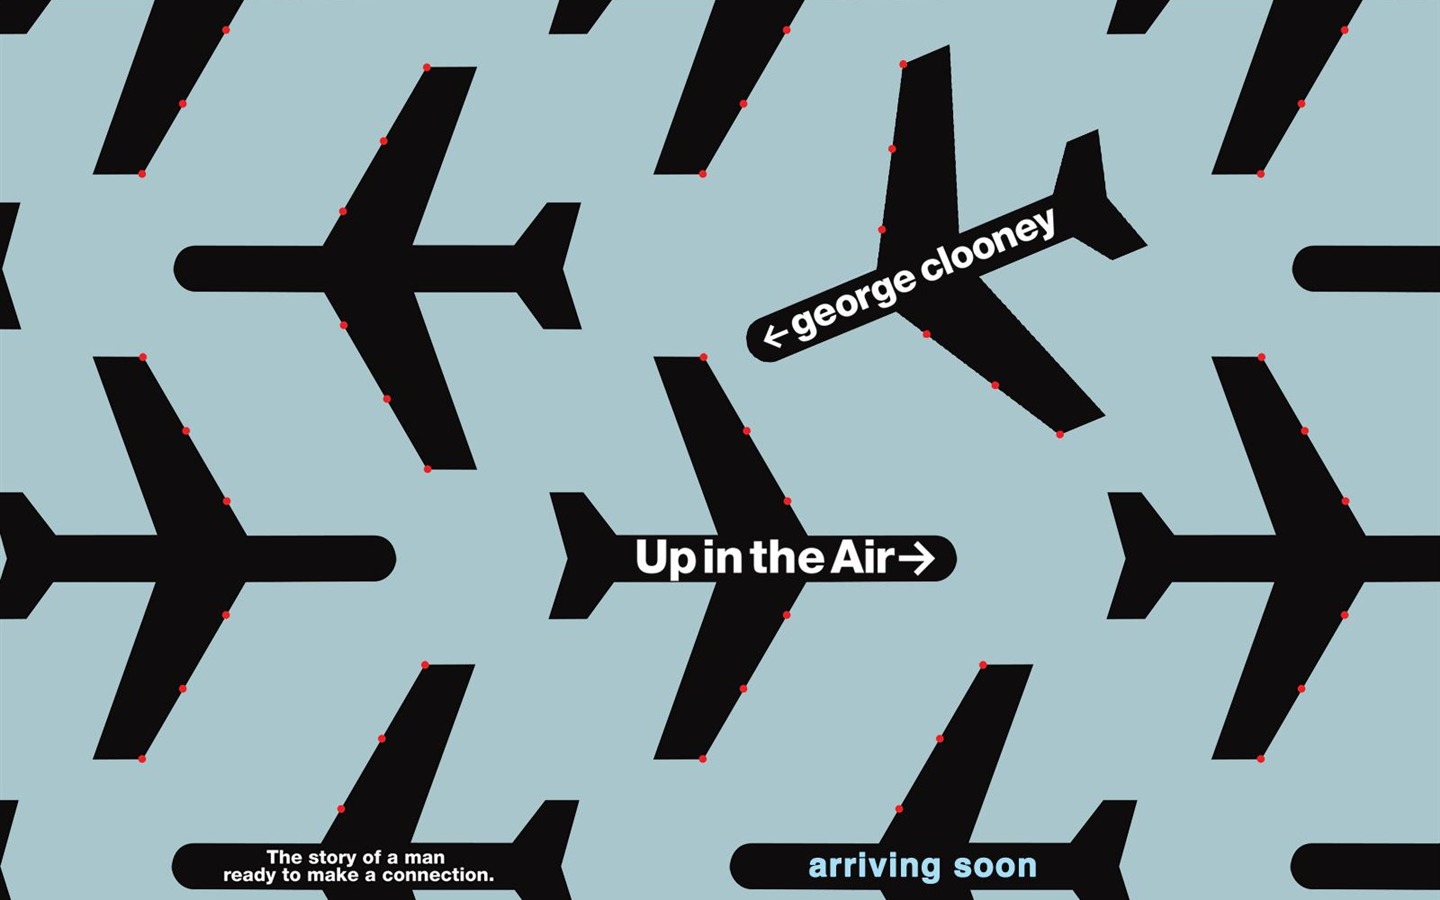 Up in the Air 在云端 高清壁纸21 - 1440x900